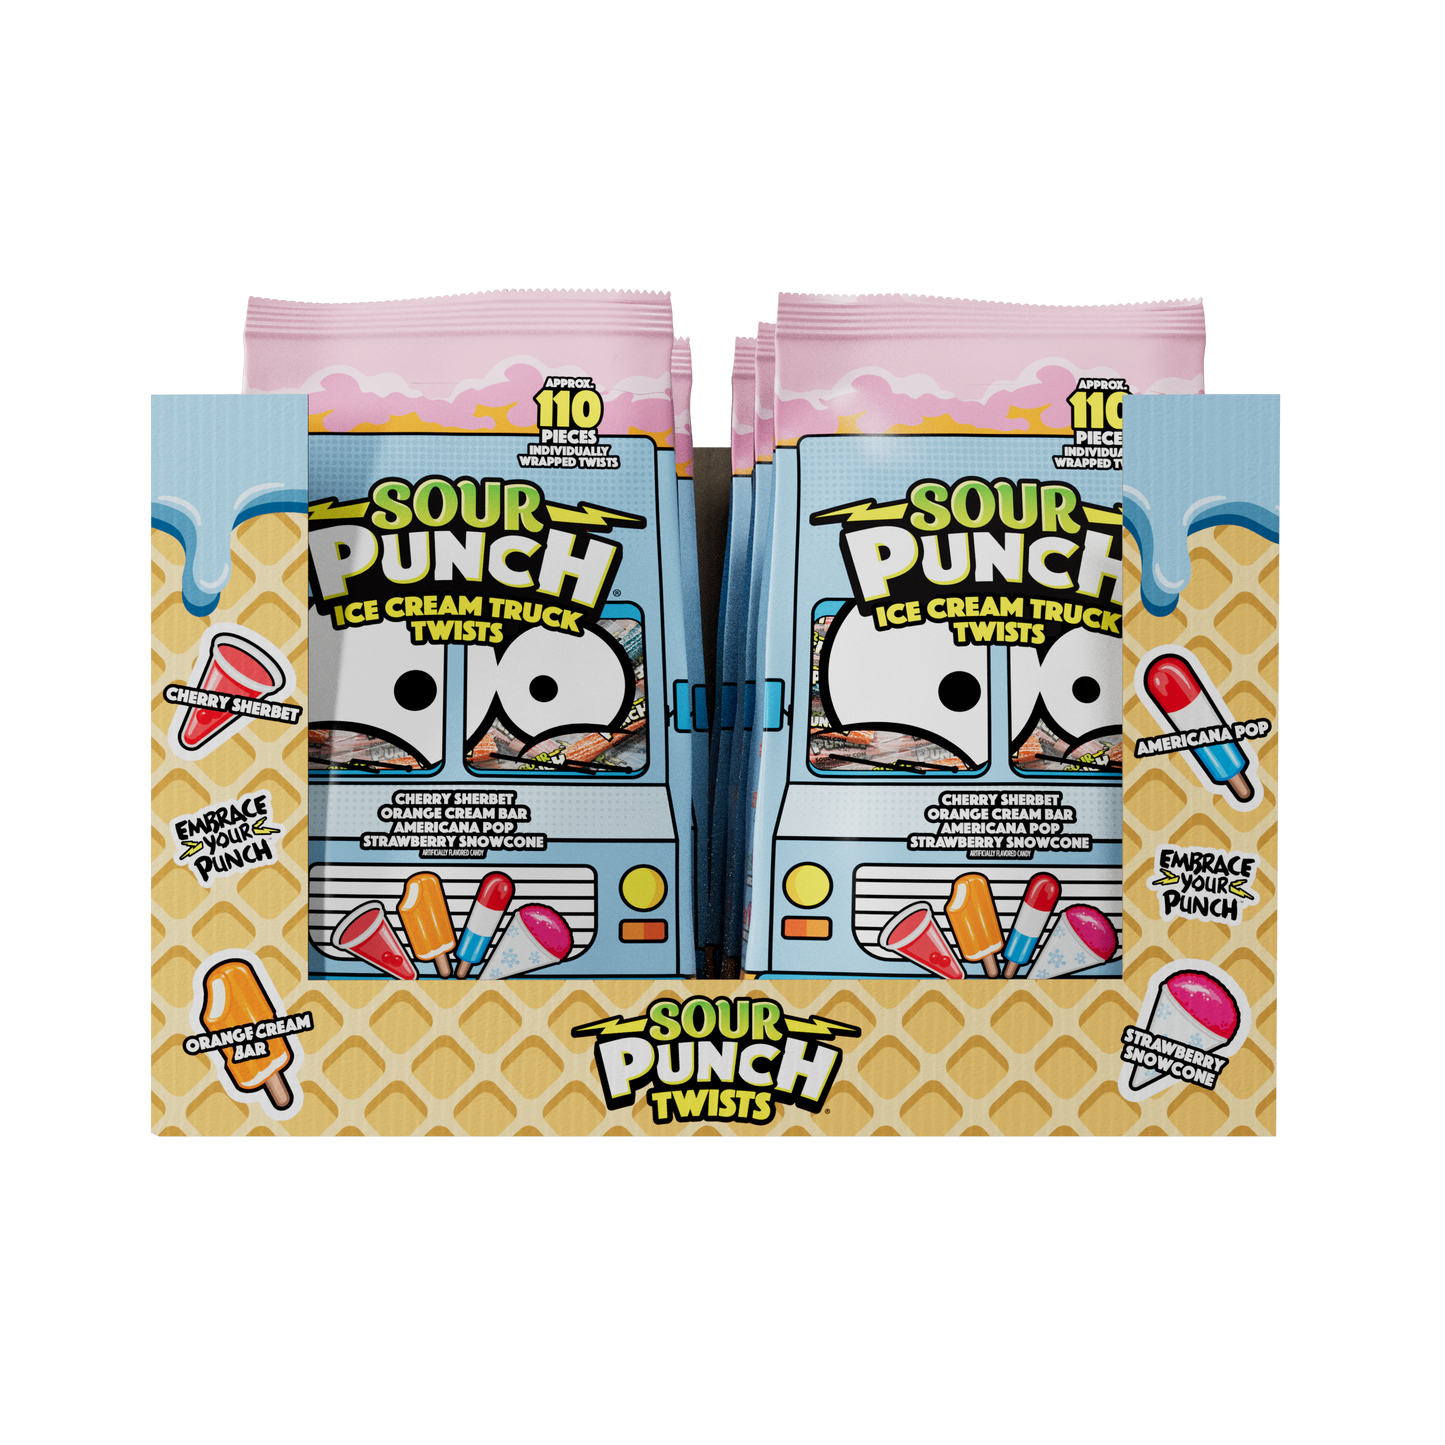 6-Pack of SOUR PUNCH Ice Cream Truck Twists ice cream candy in 24.5oz bags